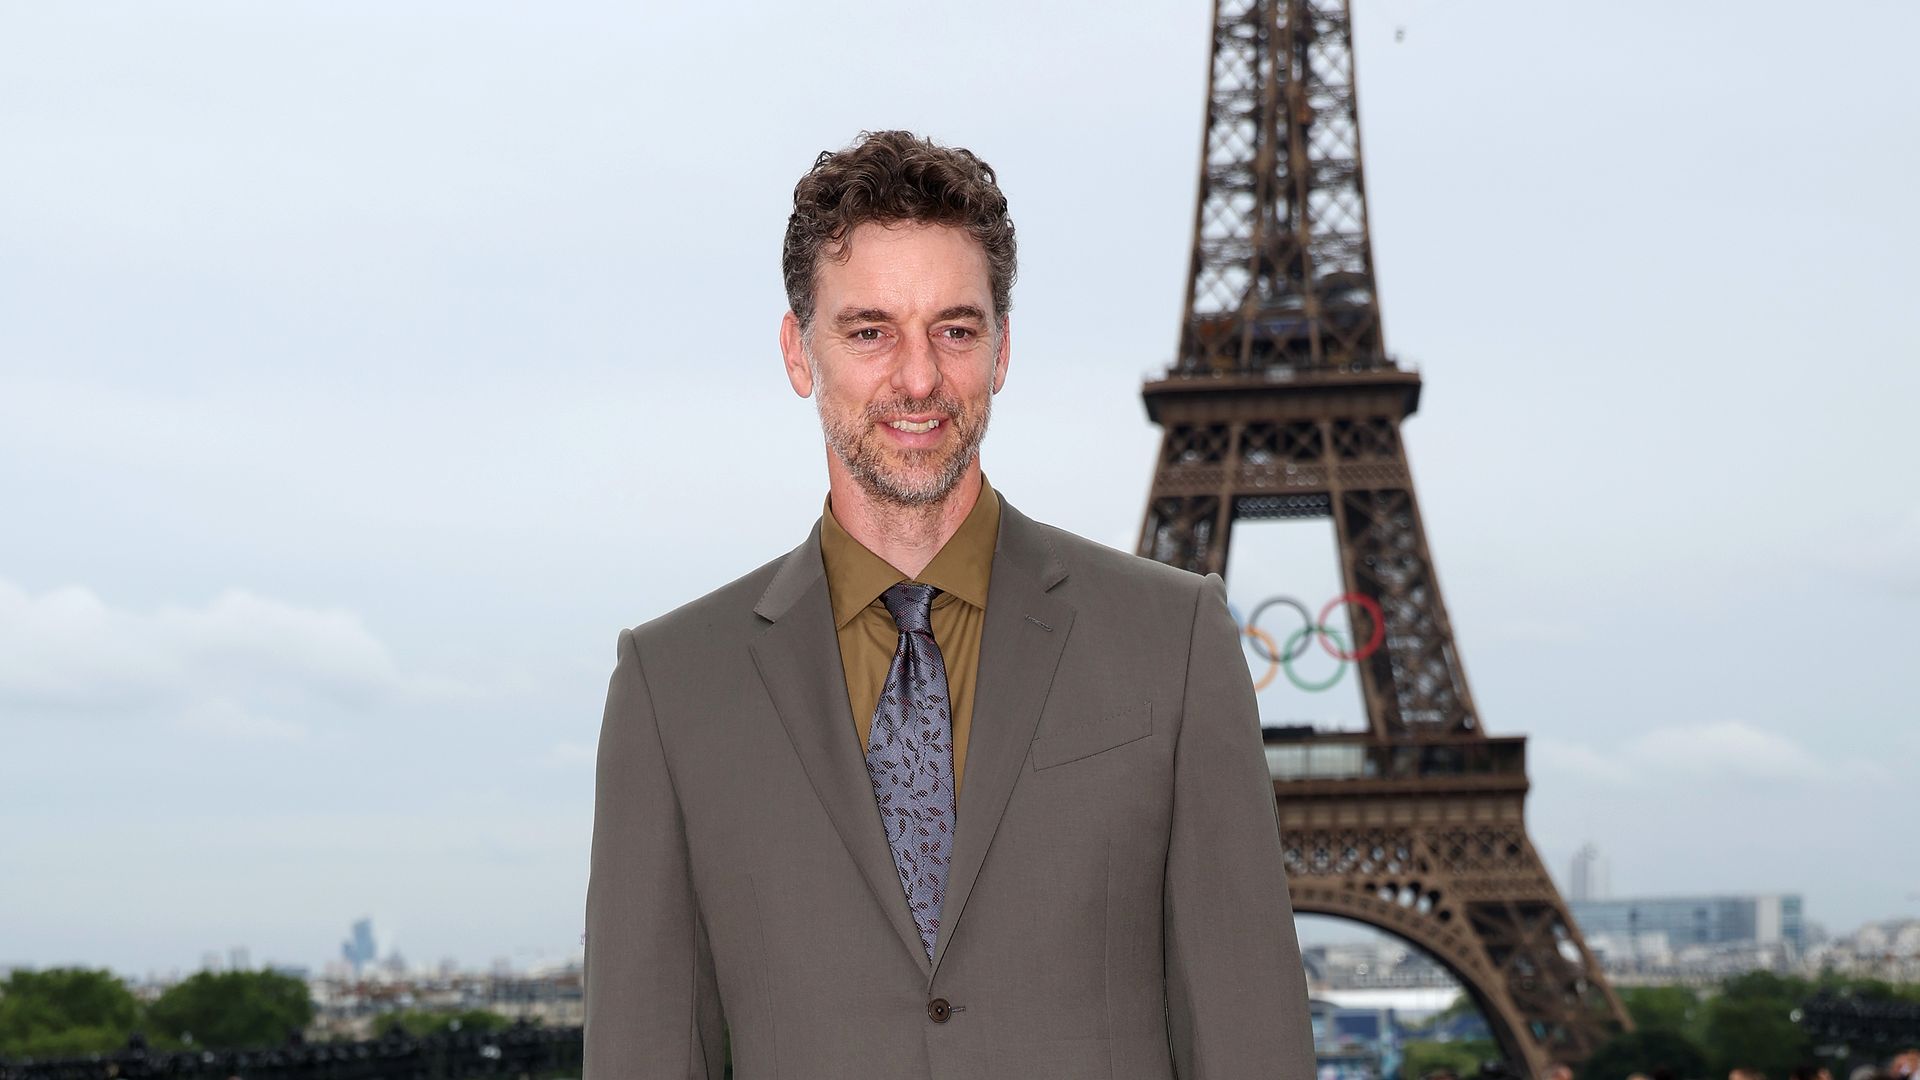 Former basketball player Pau Gasol attends the red carpet ahead of the opening ceremony of the Olympic Games Paris 2024 on July 26, 2024 in Paris, France. (Photo by Matthew Stockman/Getty Images)